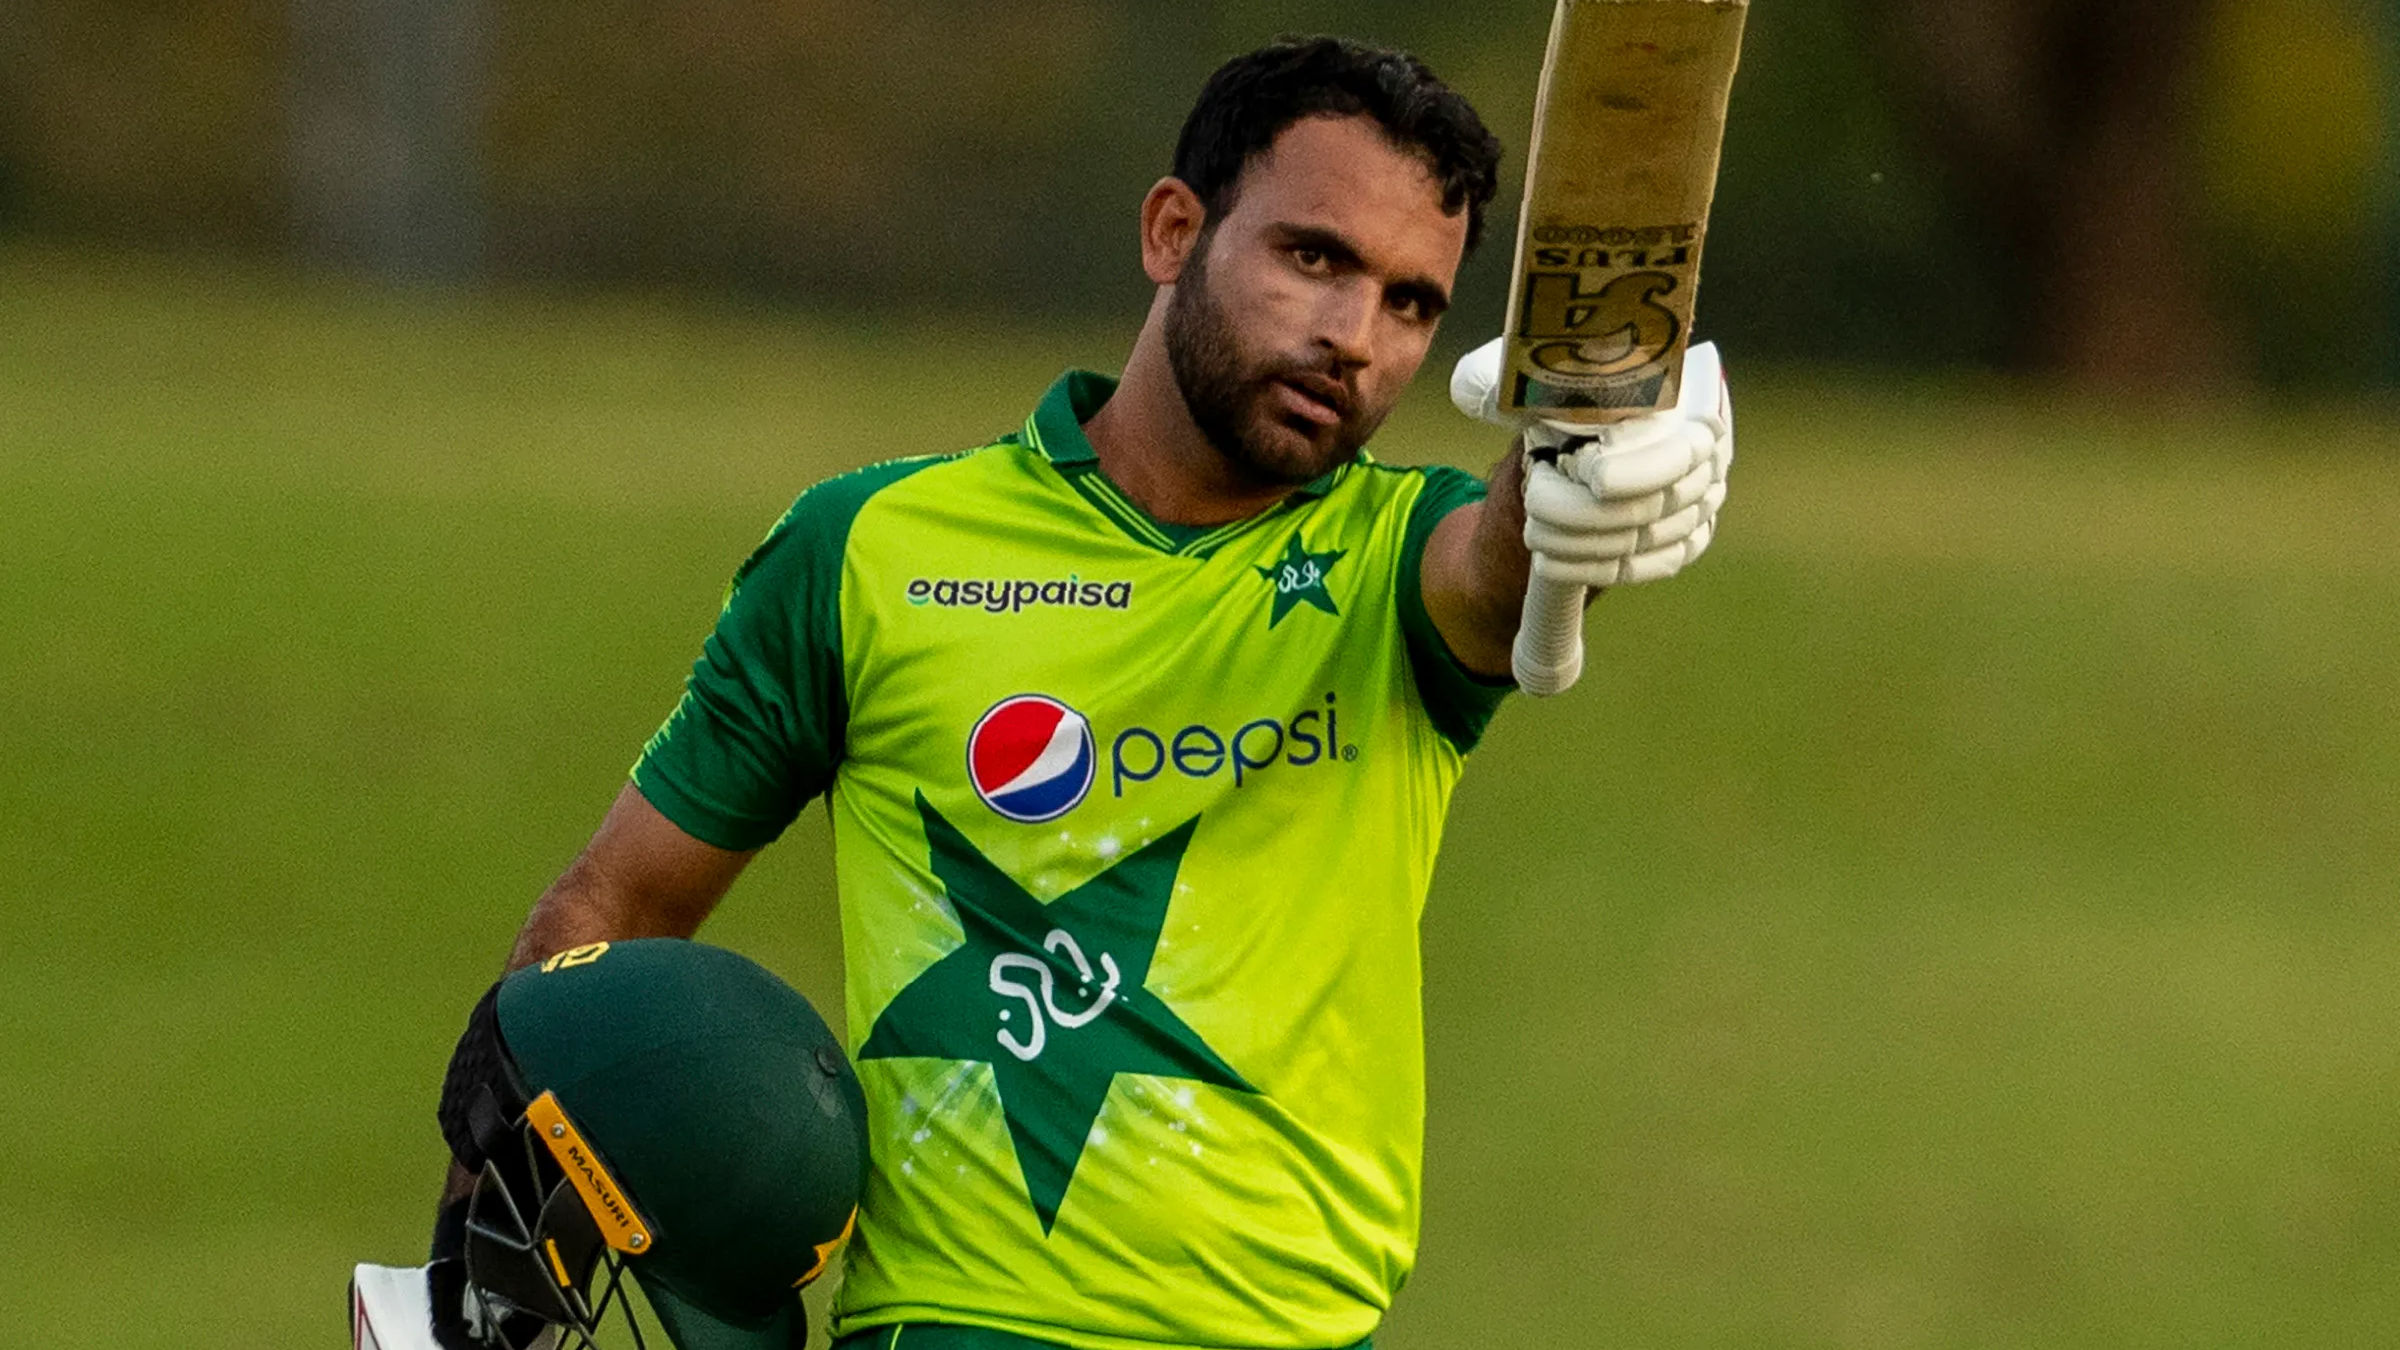 Who is Fakhar Zaman?